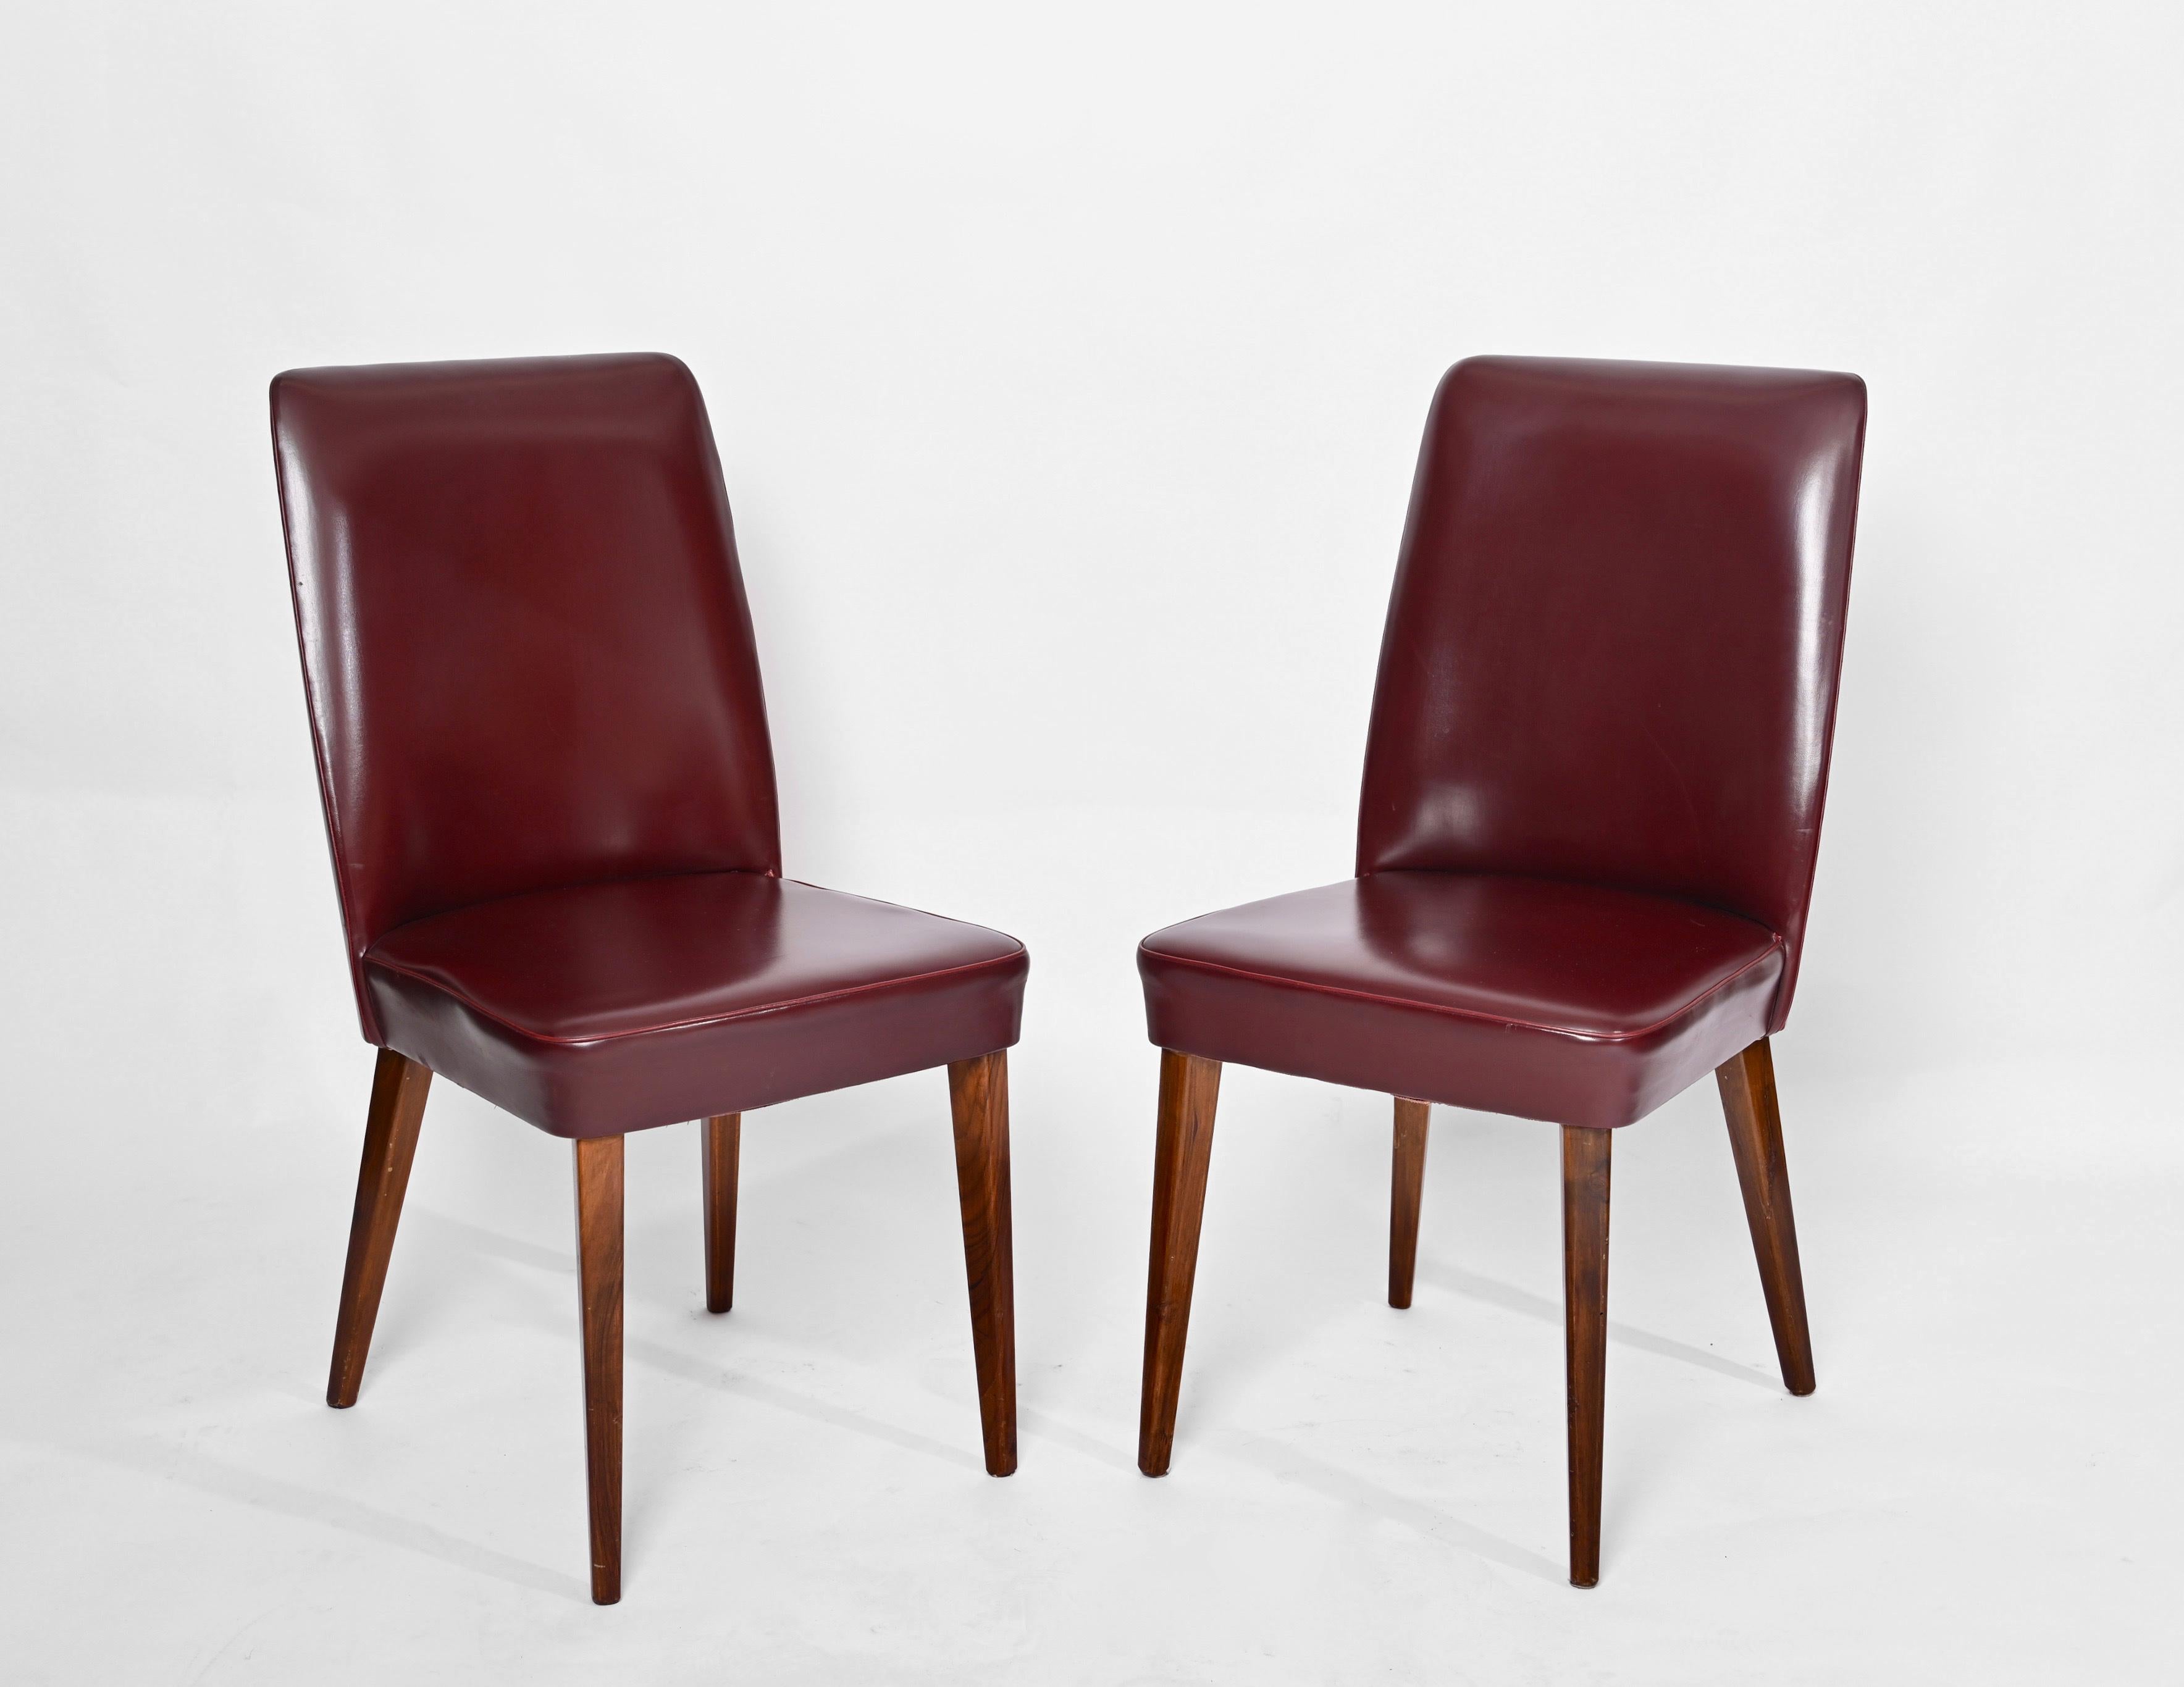 Pair of Bordeaux Leather Chairs by Anonima Castelli, Italy, 1950s For Sale 9